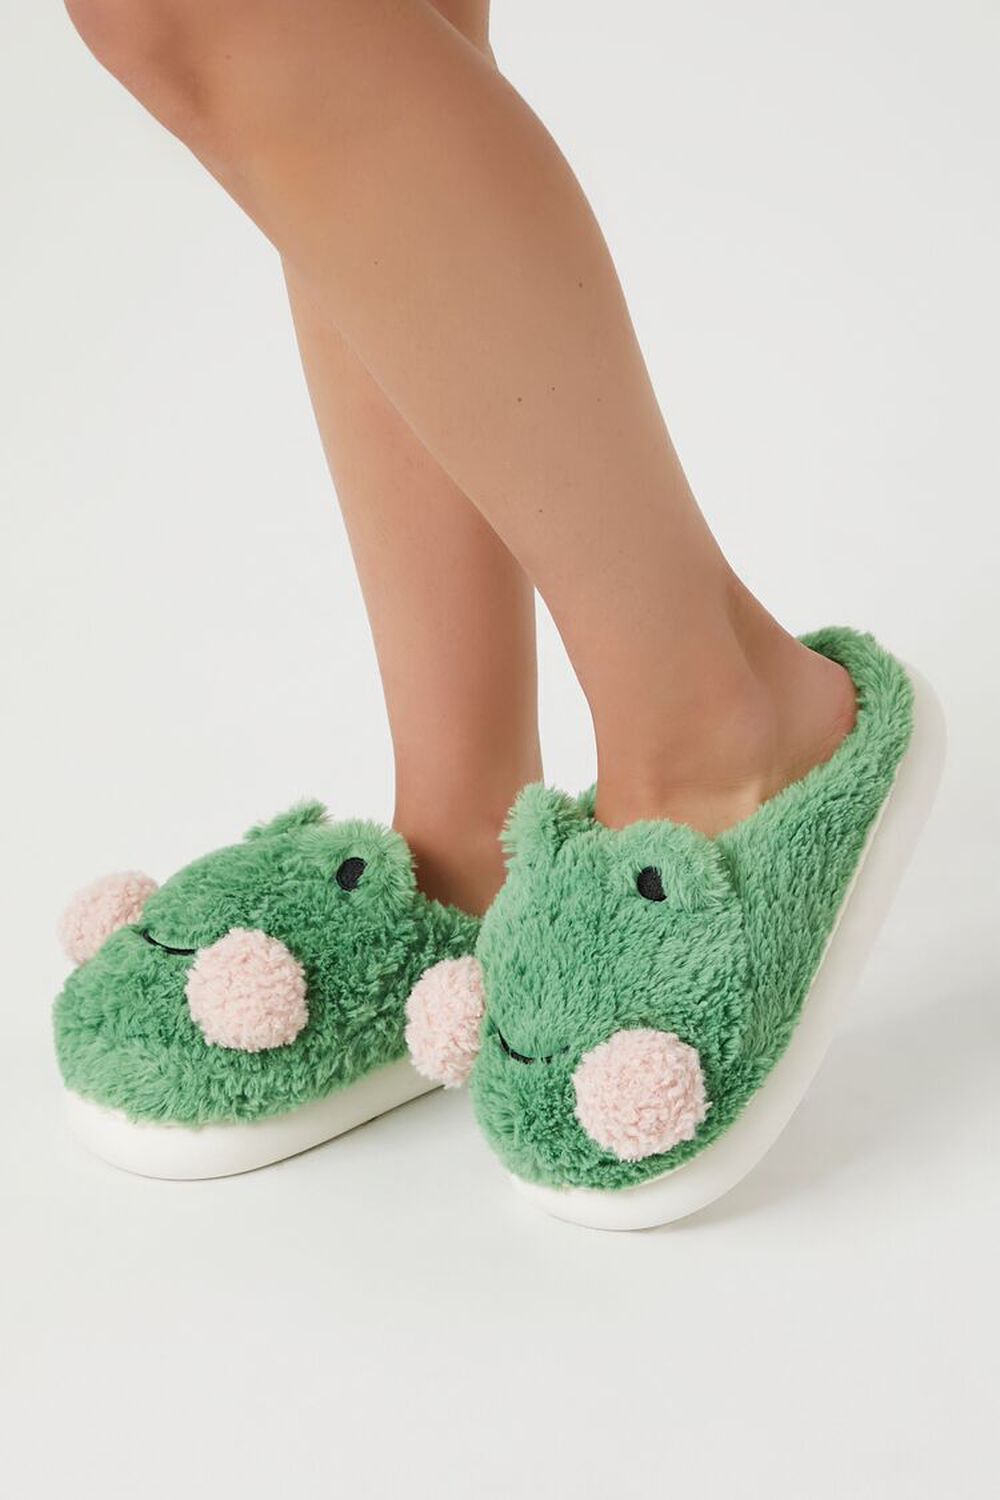 GREEN Plush Frog House Slippers, image 1